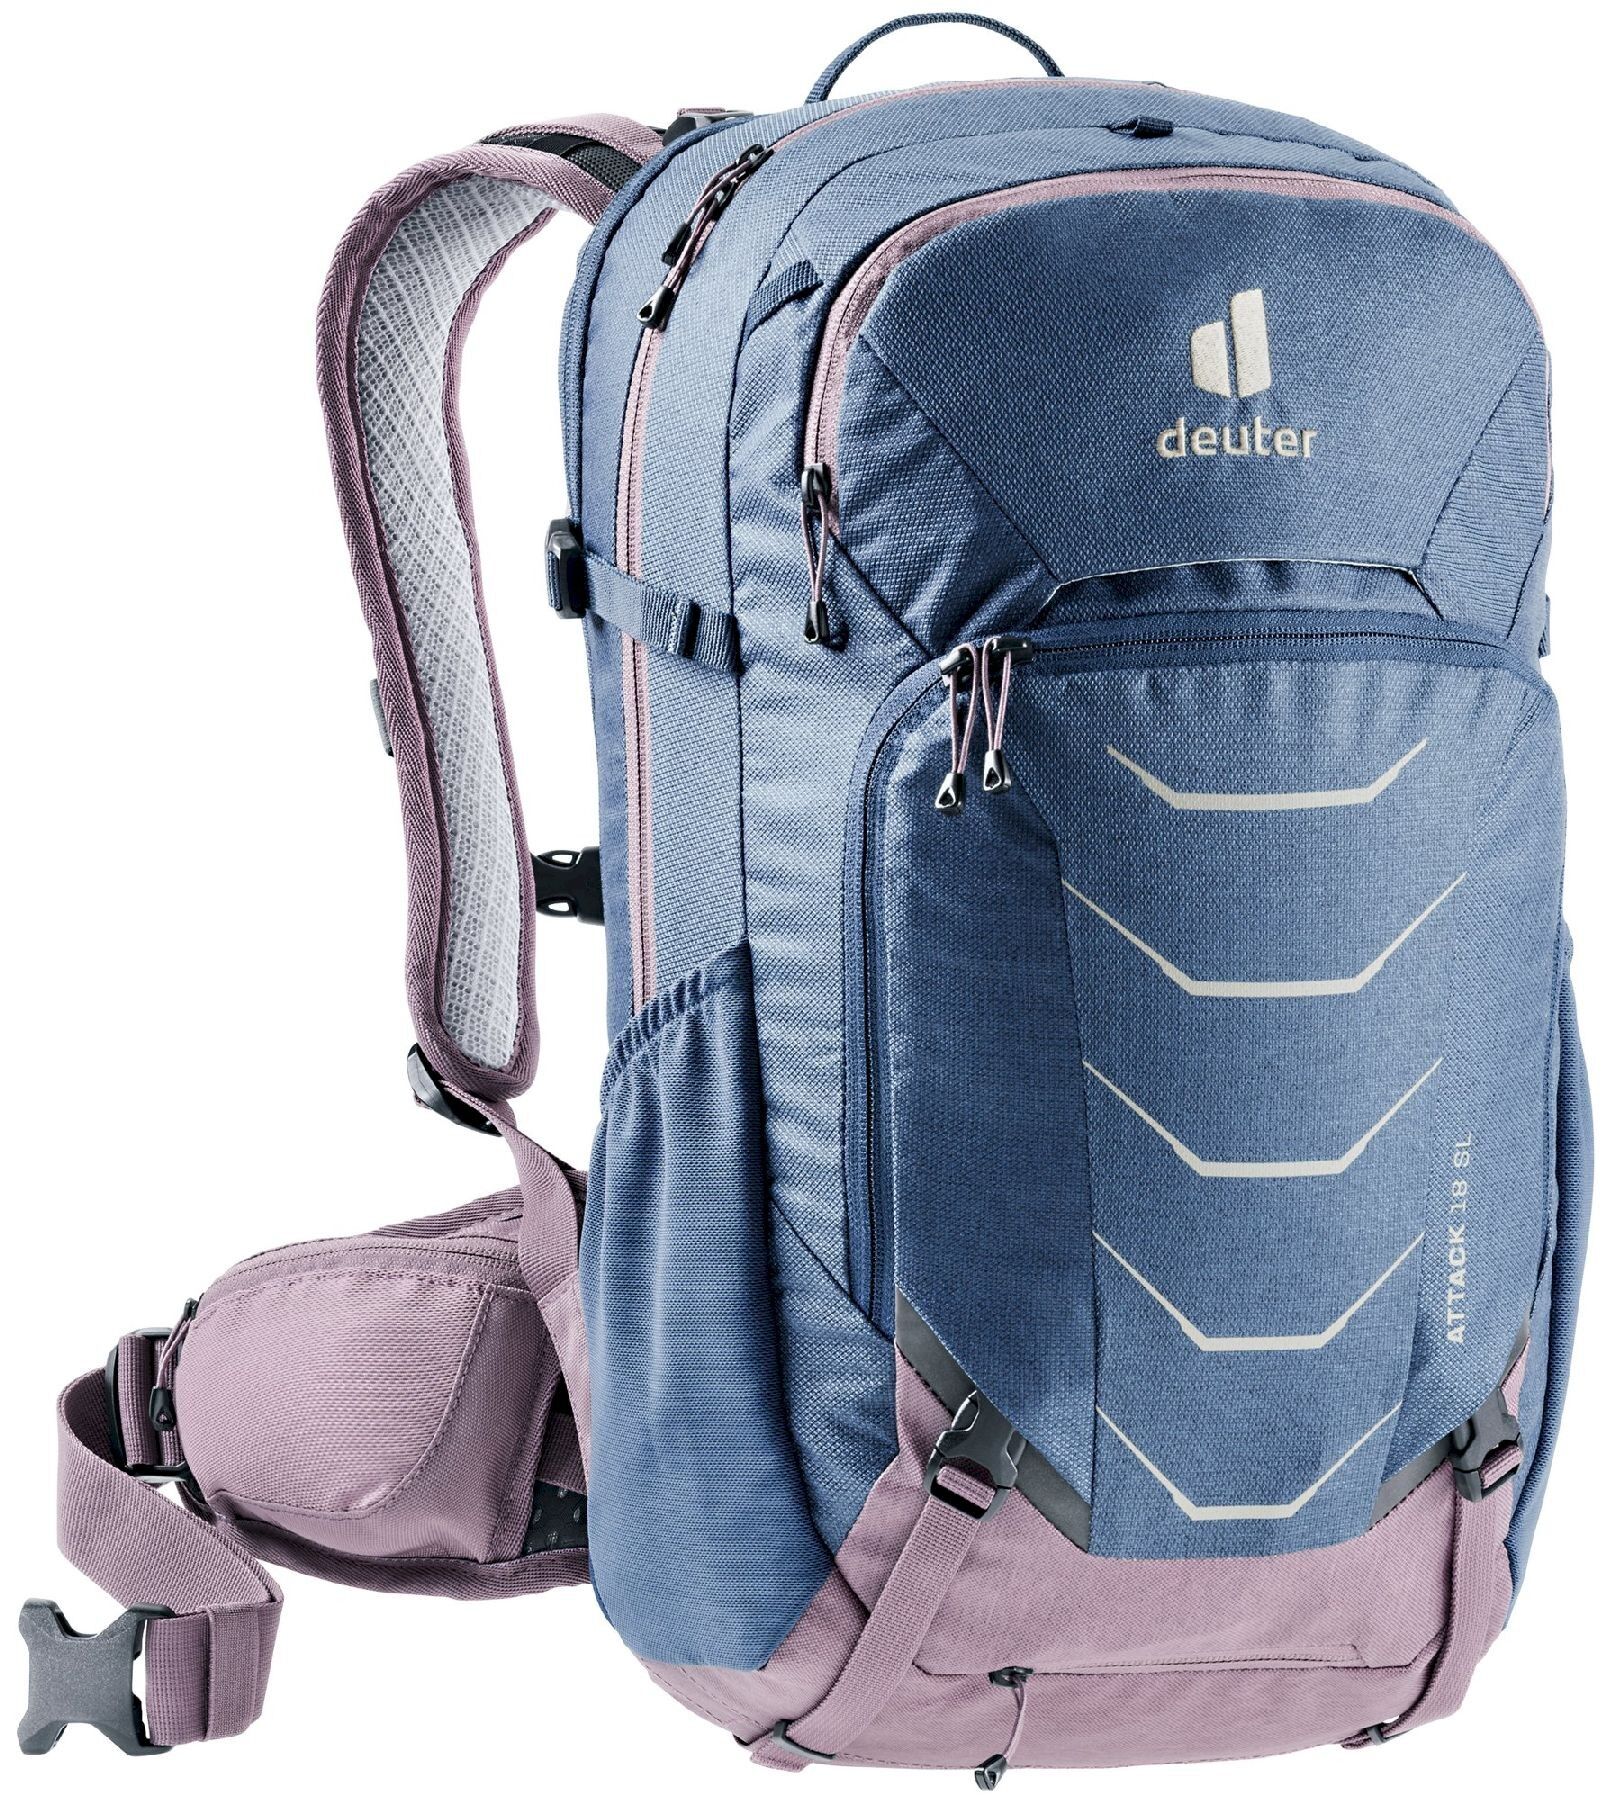 Deuter Attack 18 SL - Cycling backpack - Women's